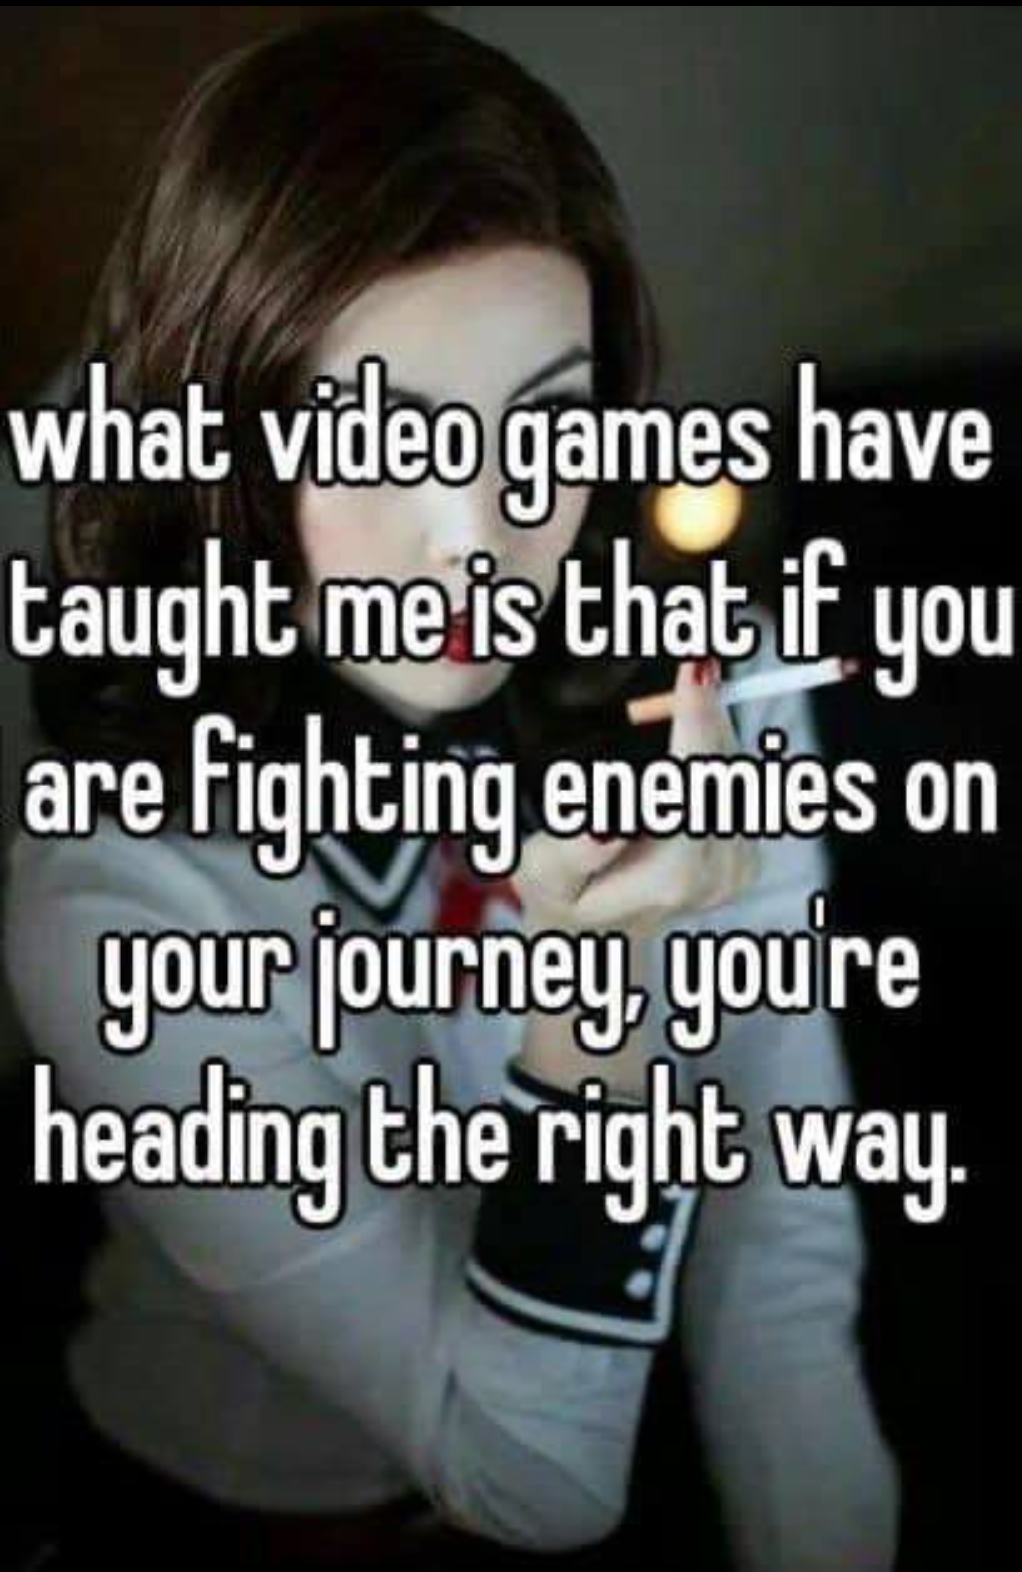 funny gaming memes - cagnotte - what video games have taught me is that if you are fighting enemies on your journey you re heading the right way